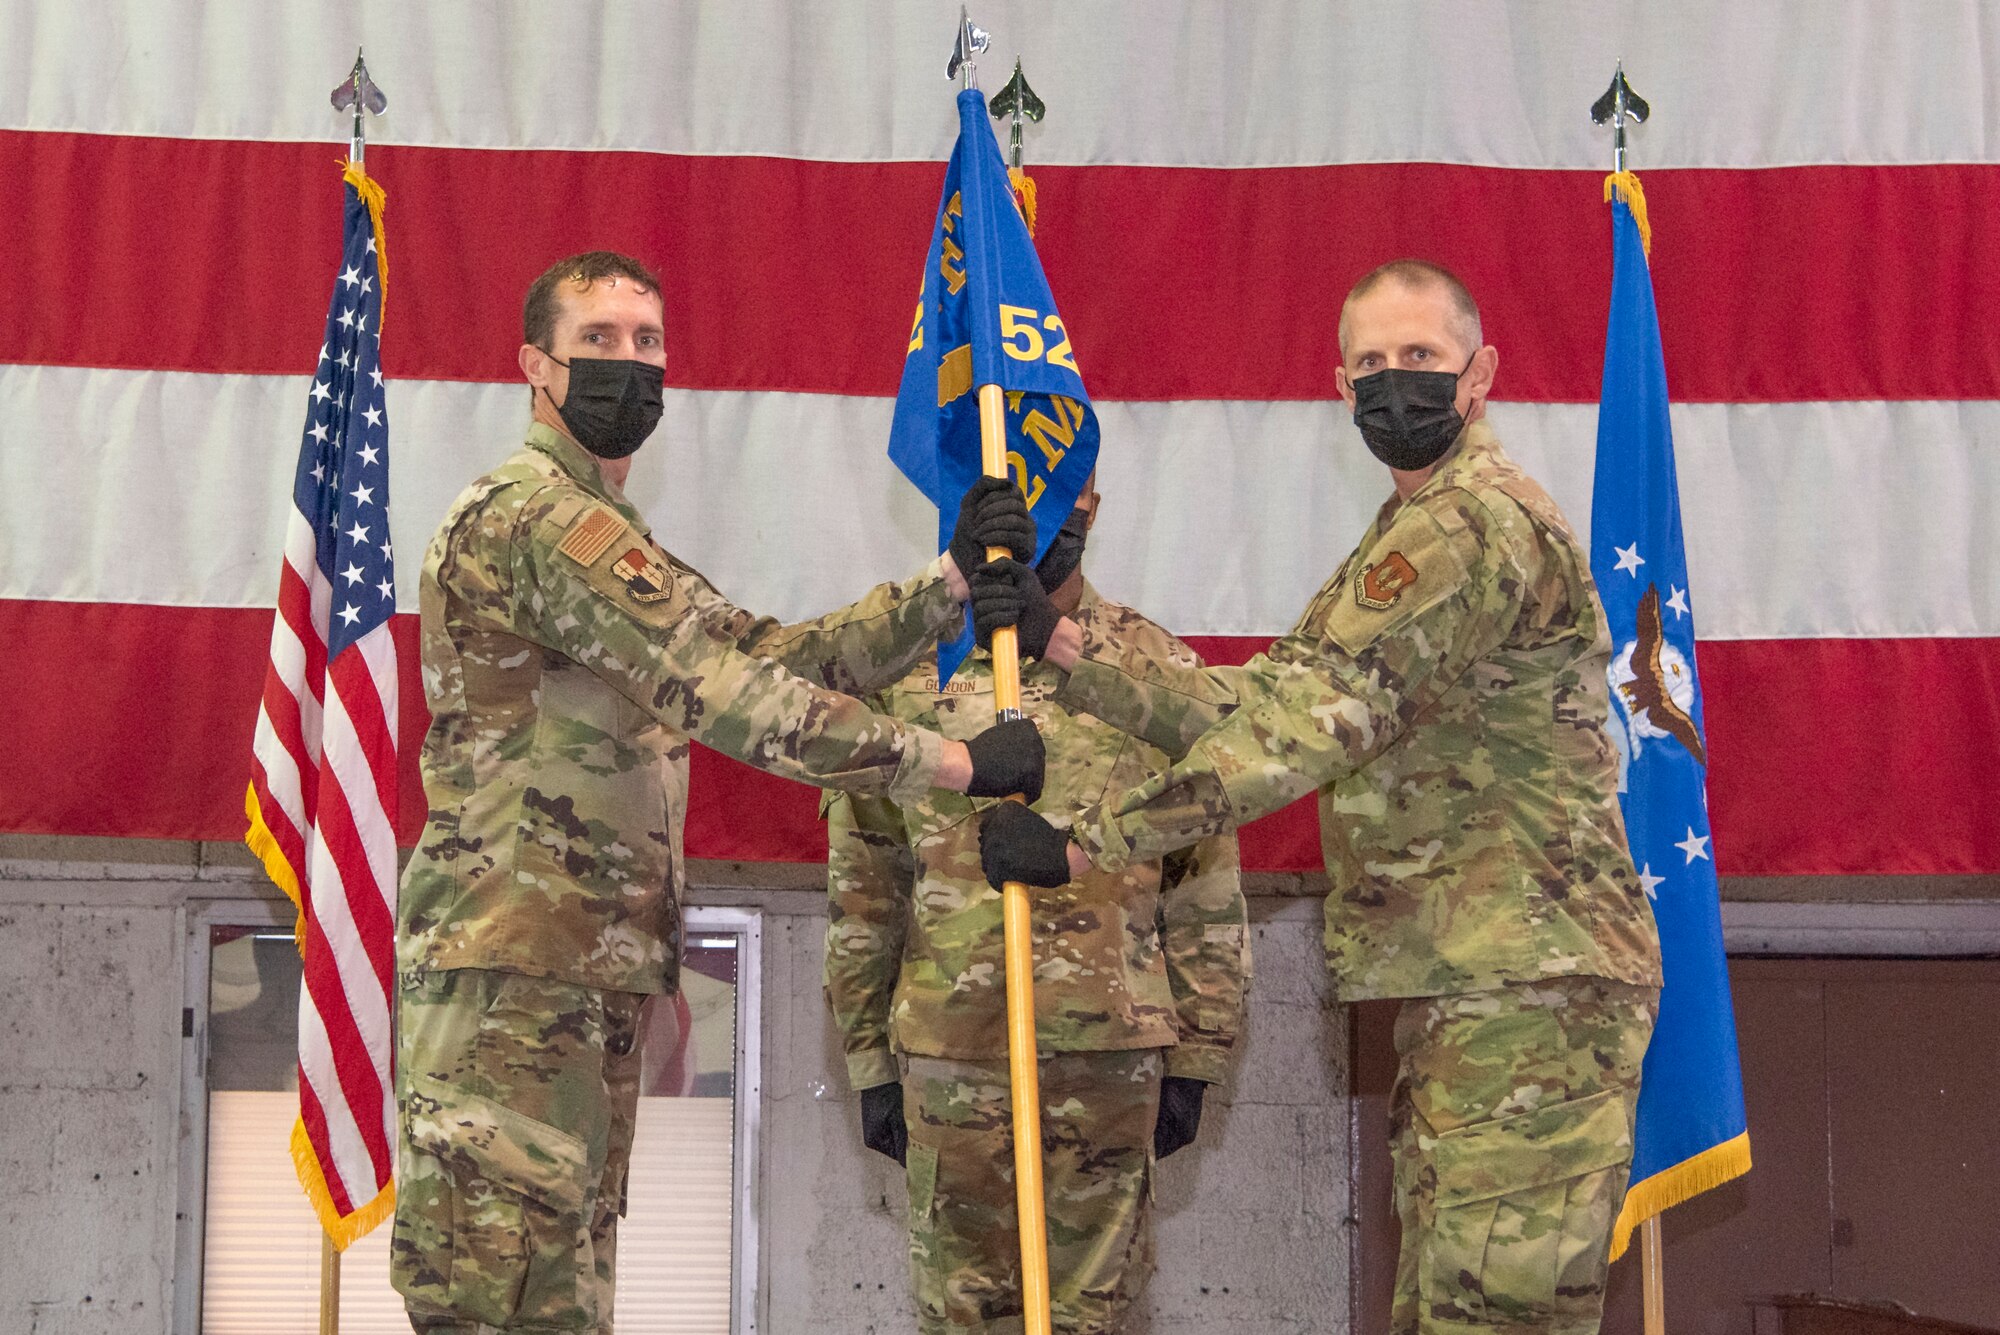 U.S. Air Force Col. David Epperson, 52nd Fighter Wing commander (left), passes the medical group guidon to U.S. Air Force Col. Peter French, the new 52nd Medical Group commander, during the 52nd MDG change of command ceremony June 30, 2021, on Spangdahlem Air Base, Germany.